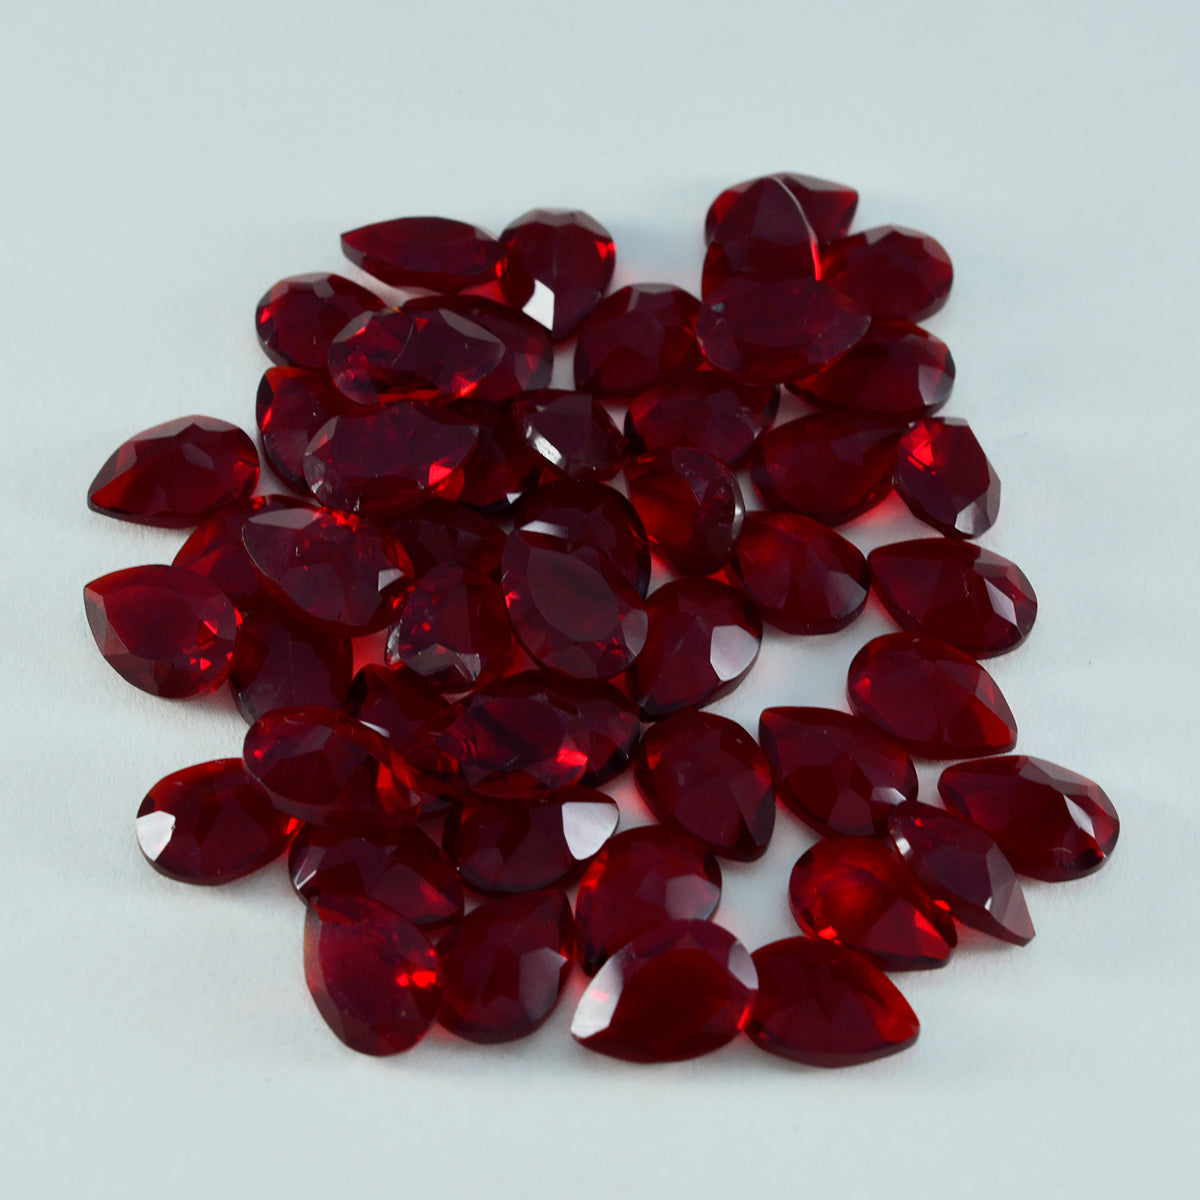 Riyogems 1PC Red Ruby CZ Faceted 5x7 mm Pear Shape awesome Quality Stone